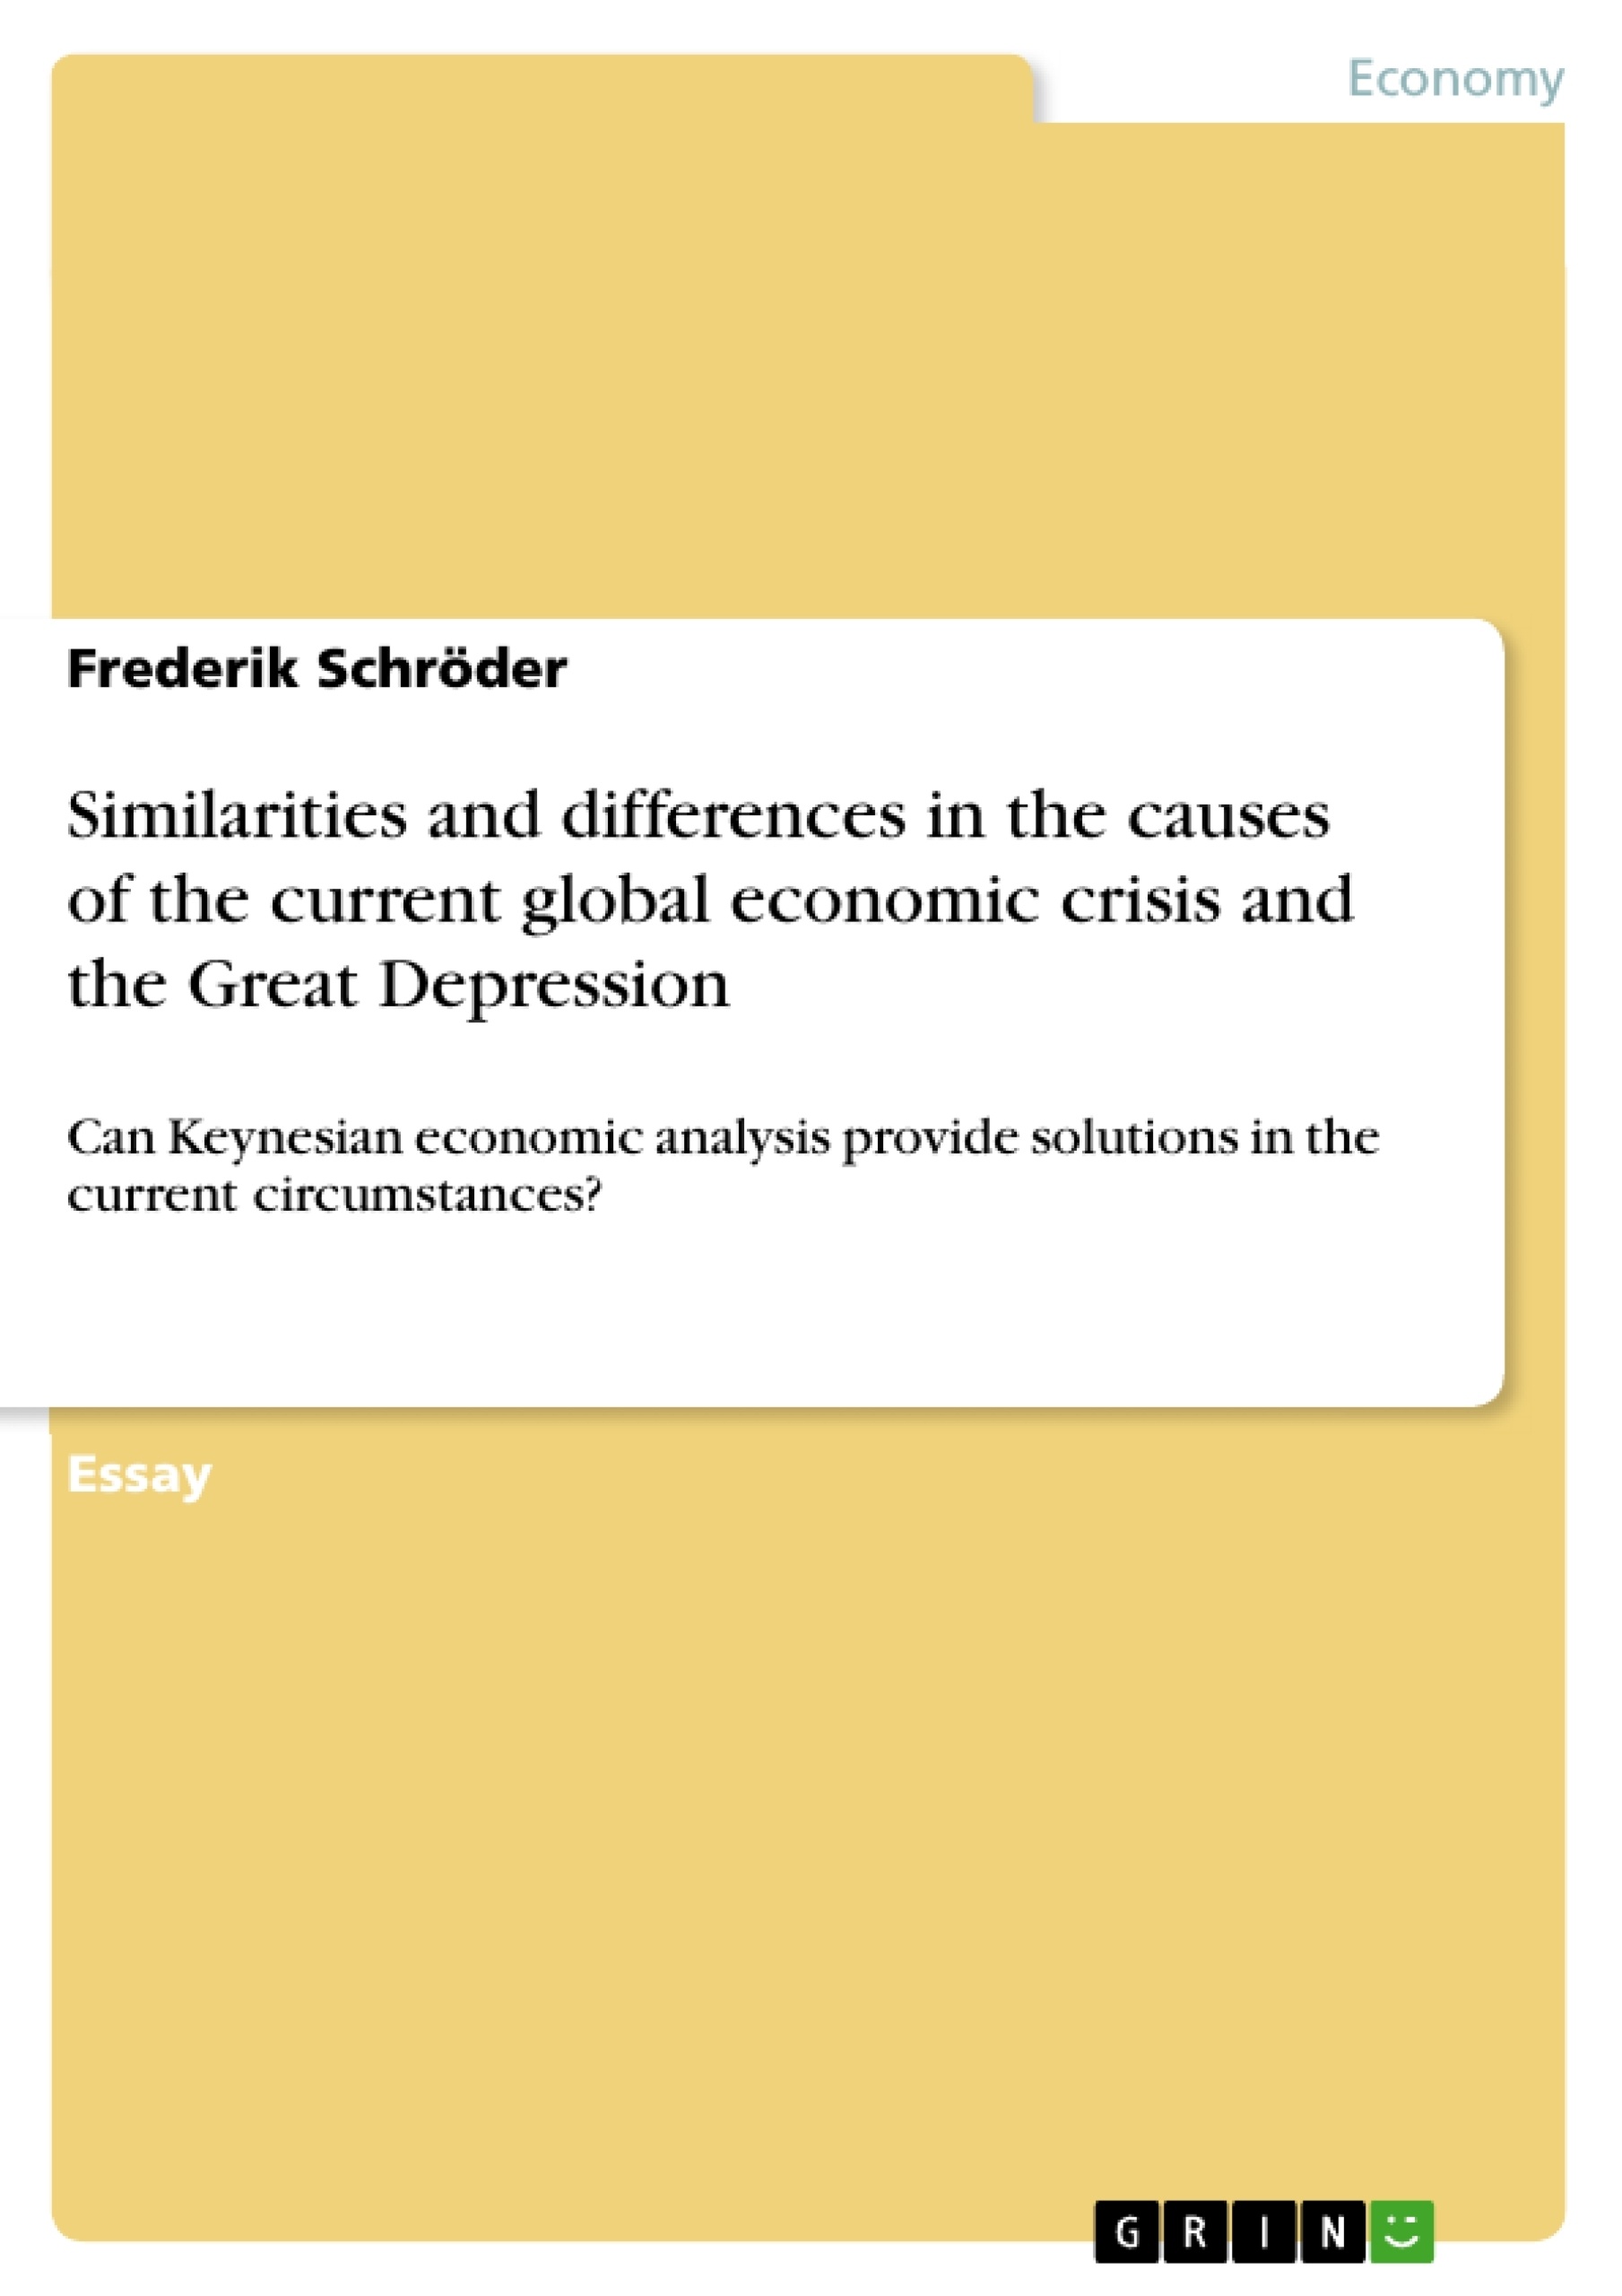 Título: Similarities and differences in the causes of the current global economic crisis and the Great Depression